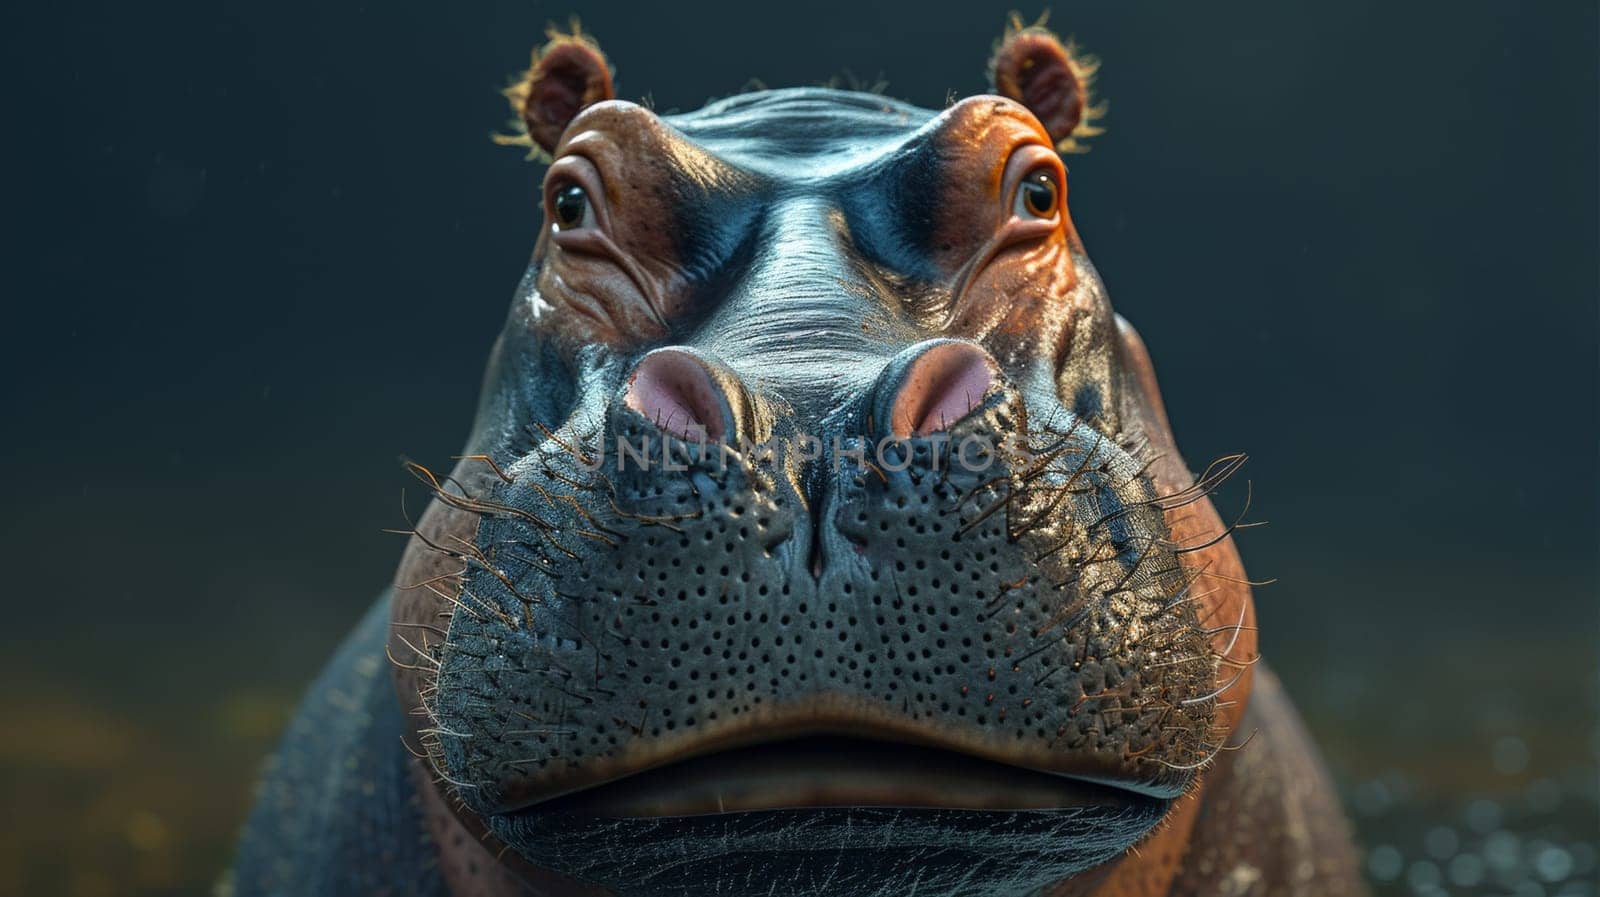 A close up of a hippo's face with its nose in the water